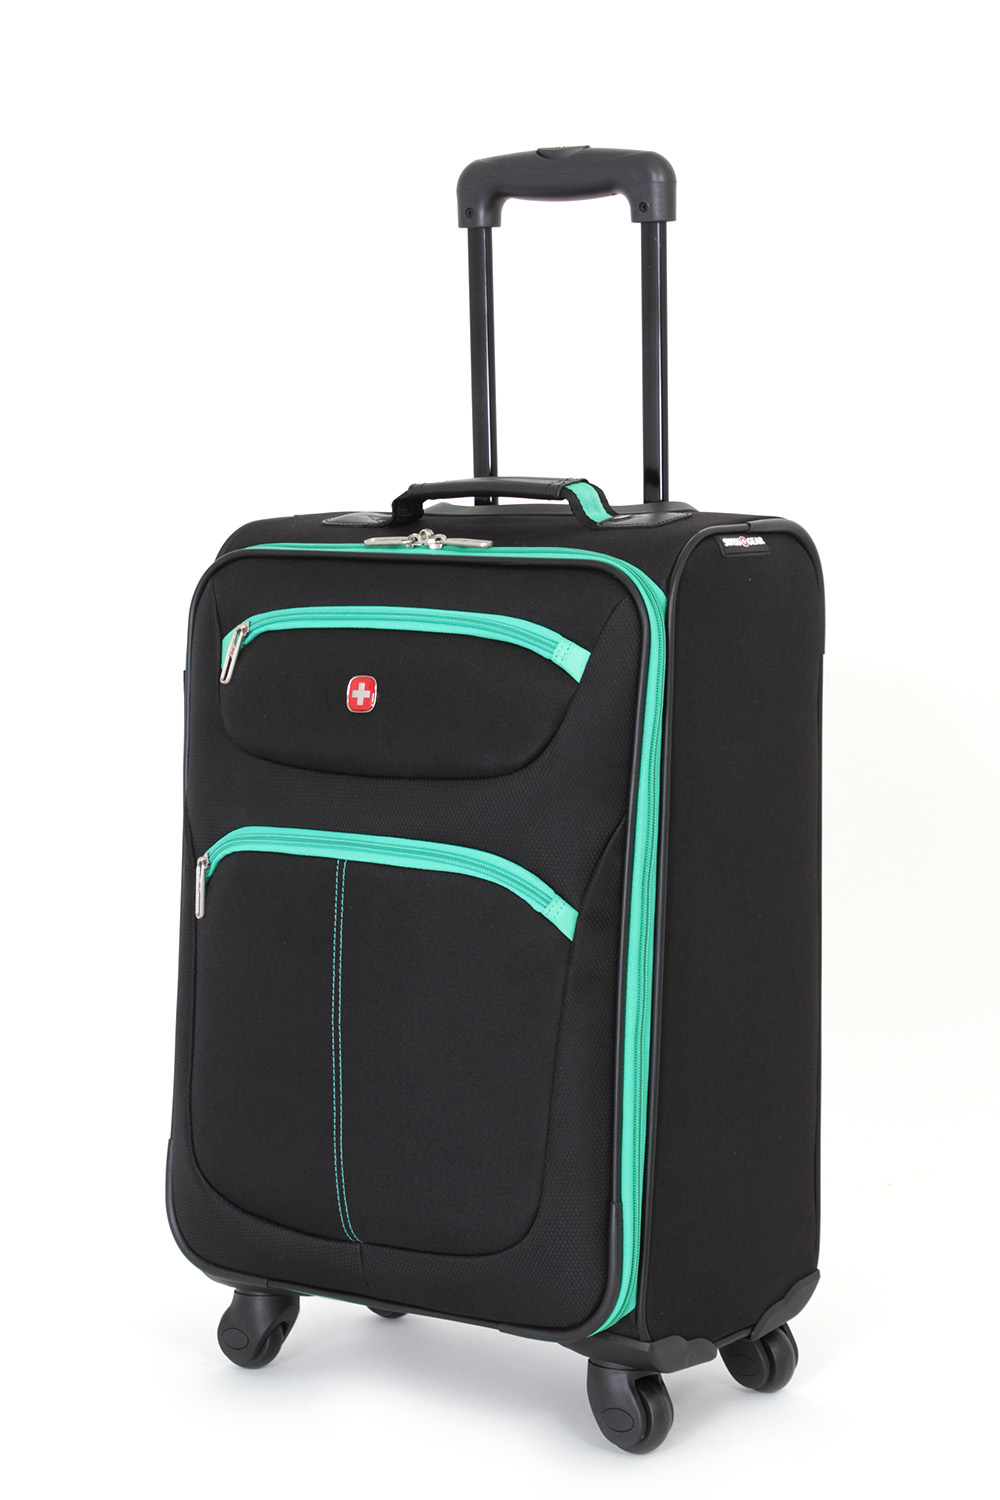 Best Wheeled Backpack Carry On Luggage | IQS Executive